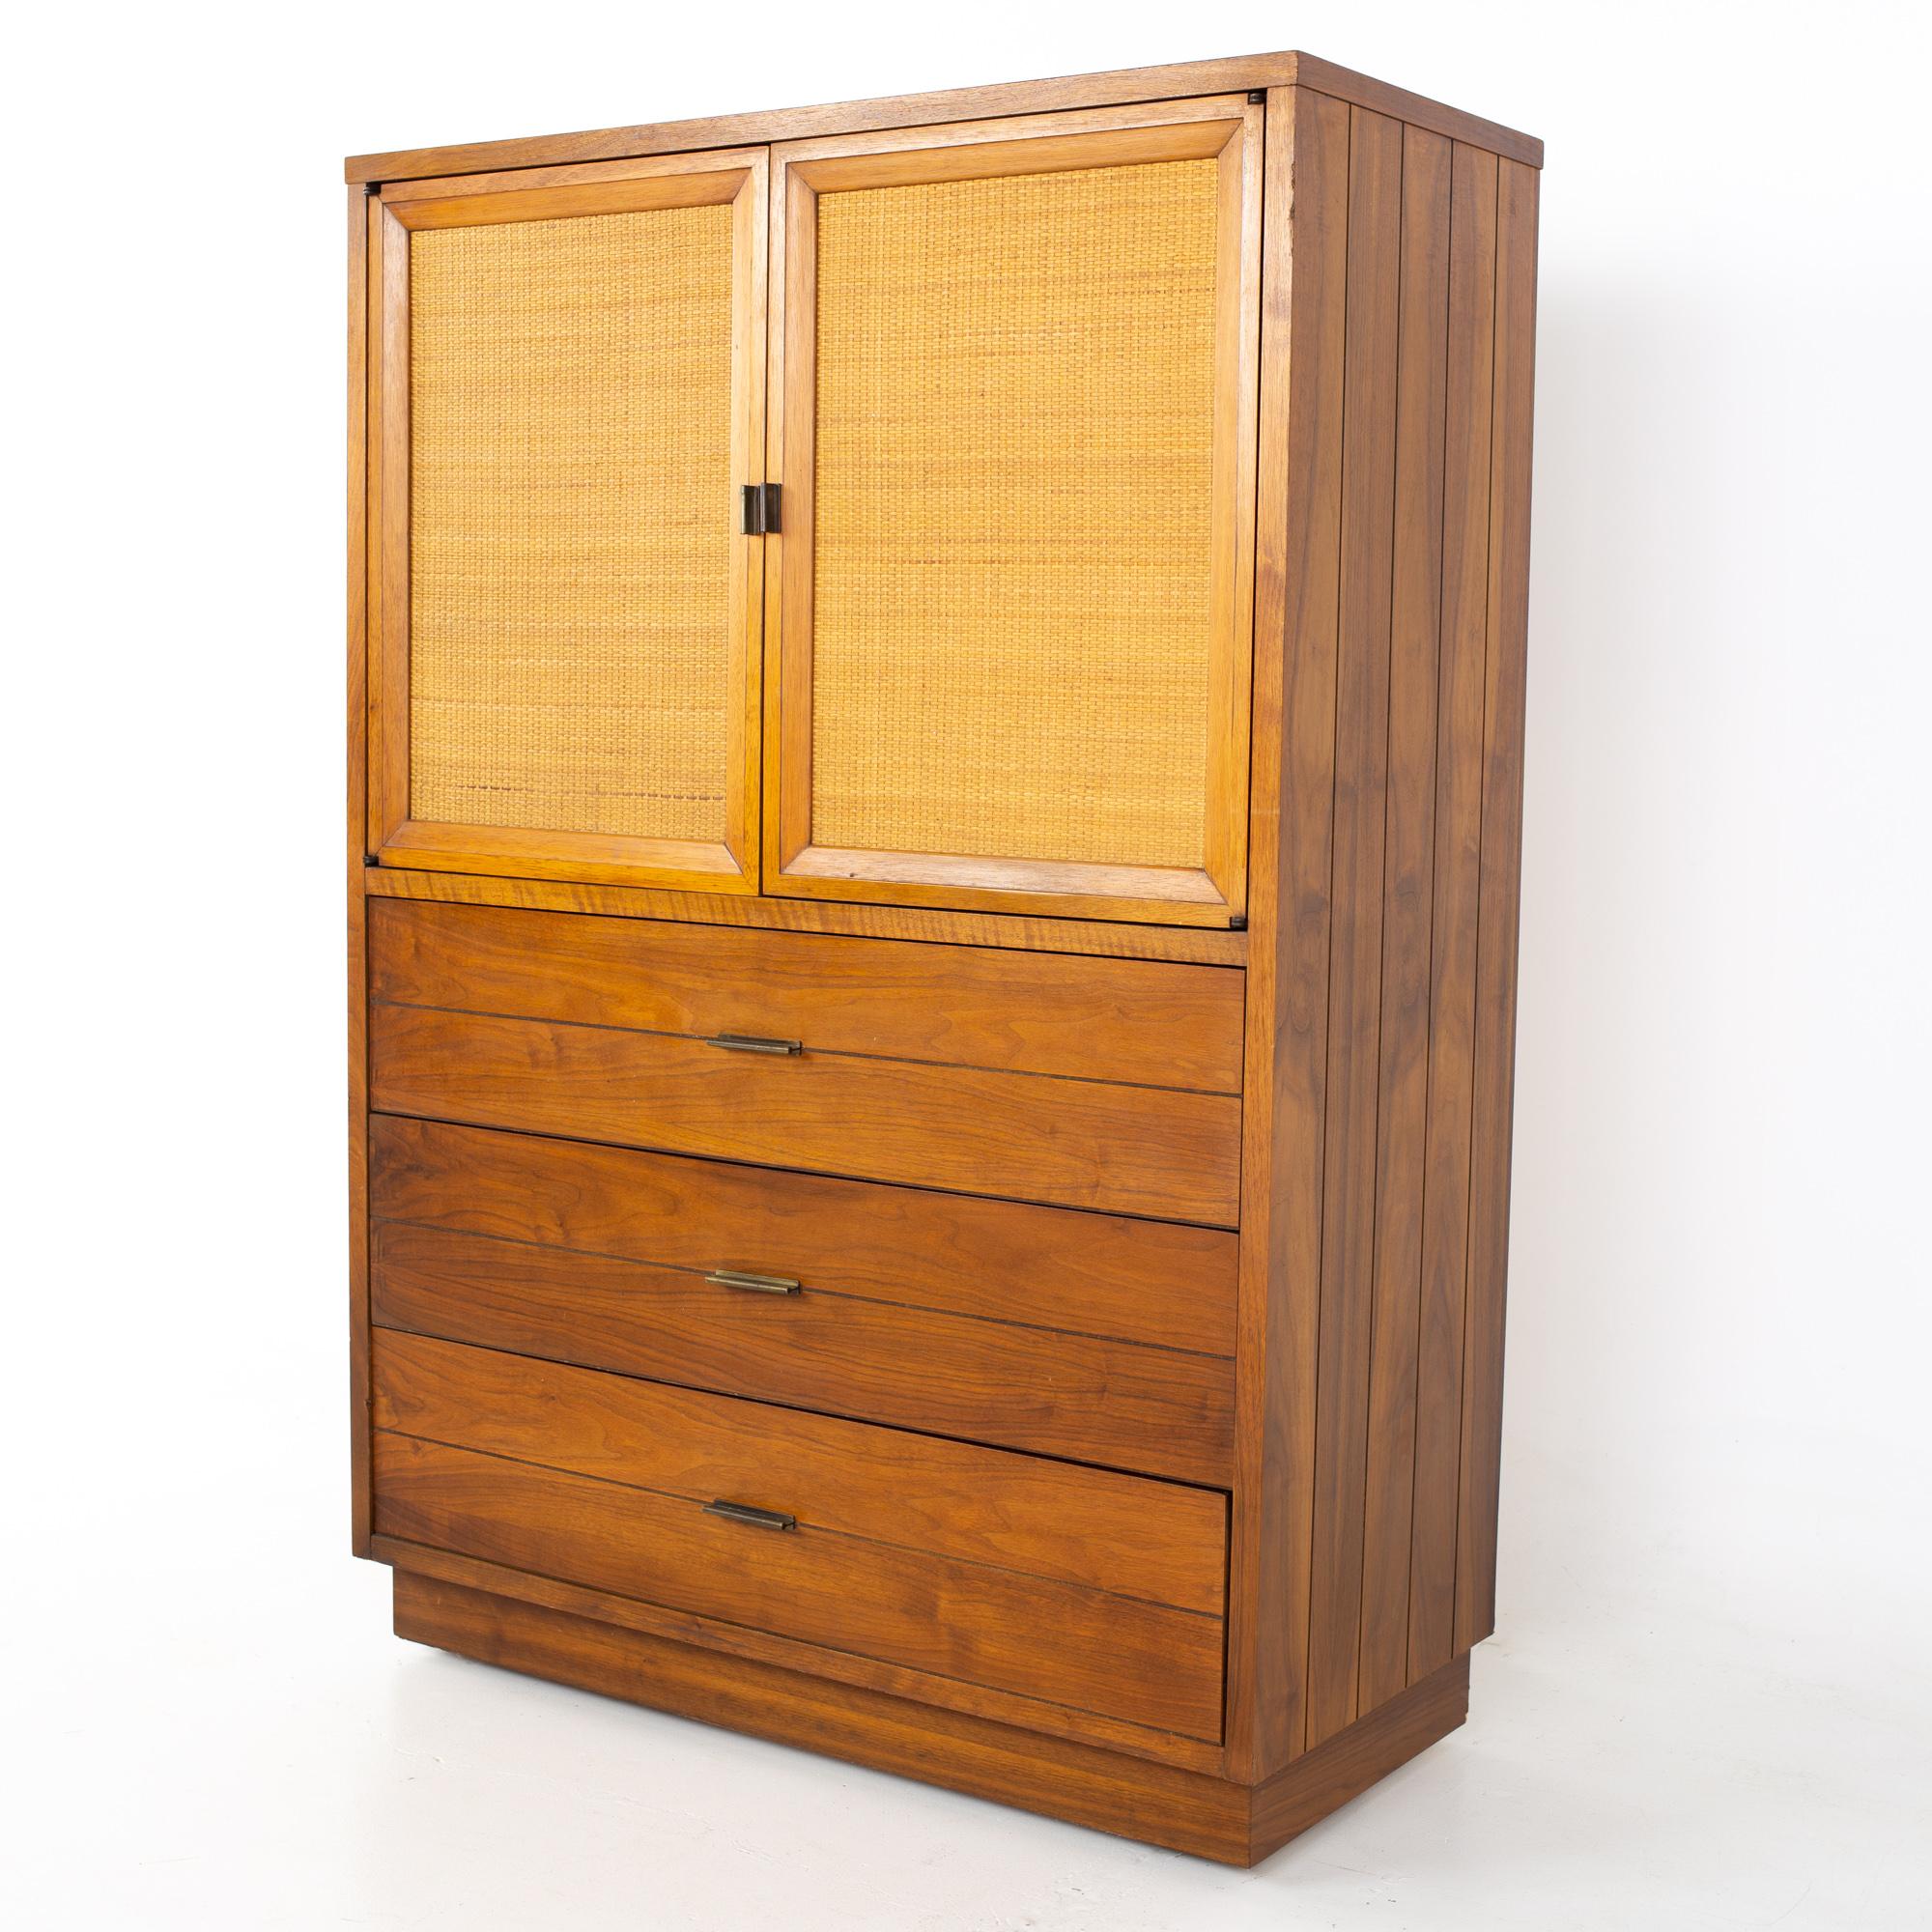 Lane mid century walnut and cane plinth base armoire gentleman's chest highboy dresser
Dresser measures: 39.25 wide x 18 deep x 56.5 inches high

All pieces of furniture can be had in what we call restored vintage condition. That means the piece